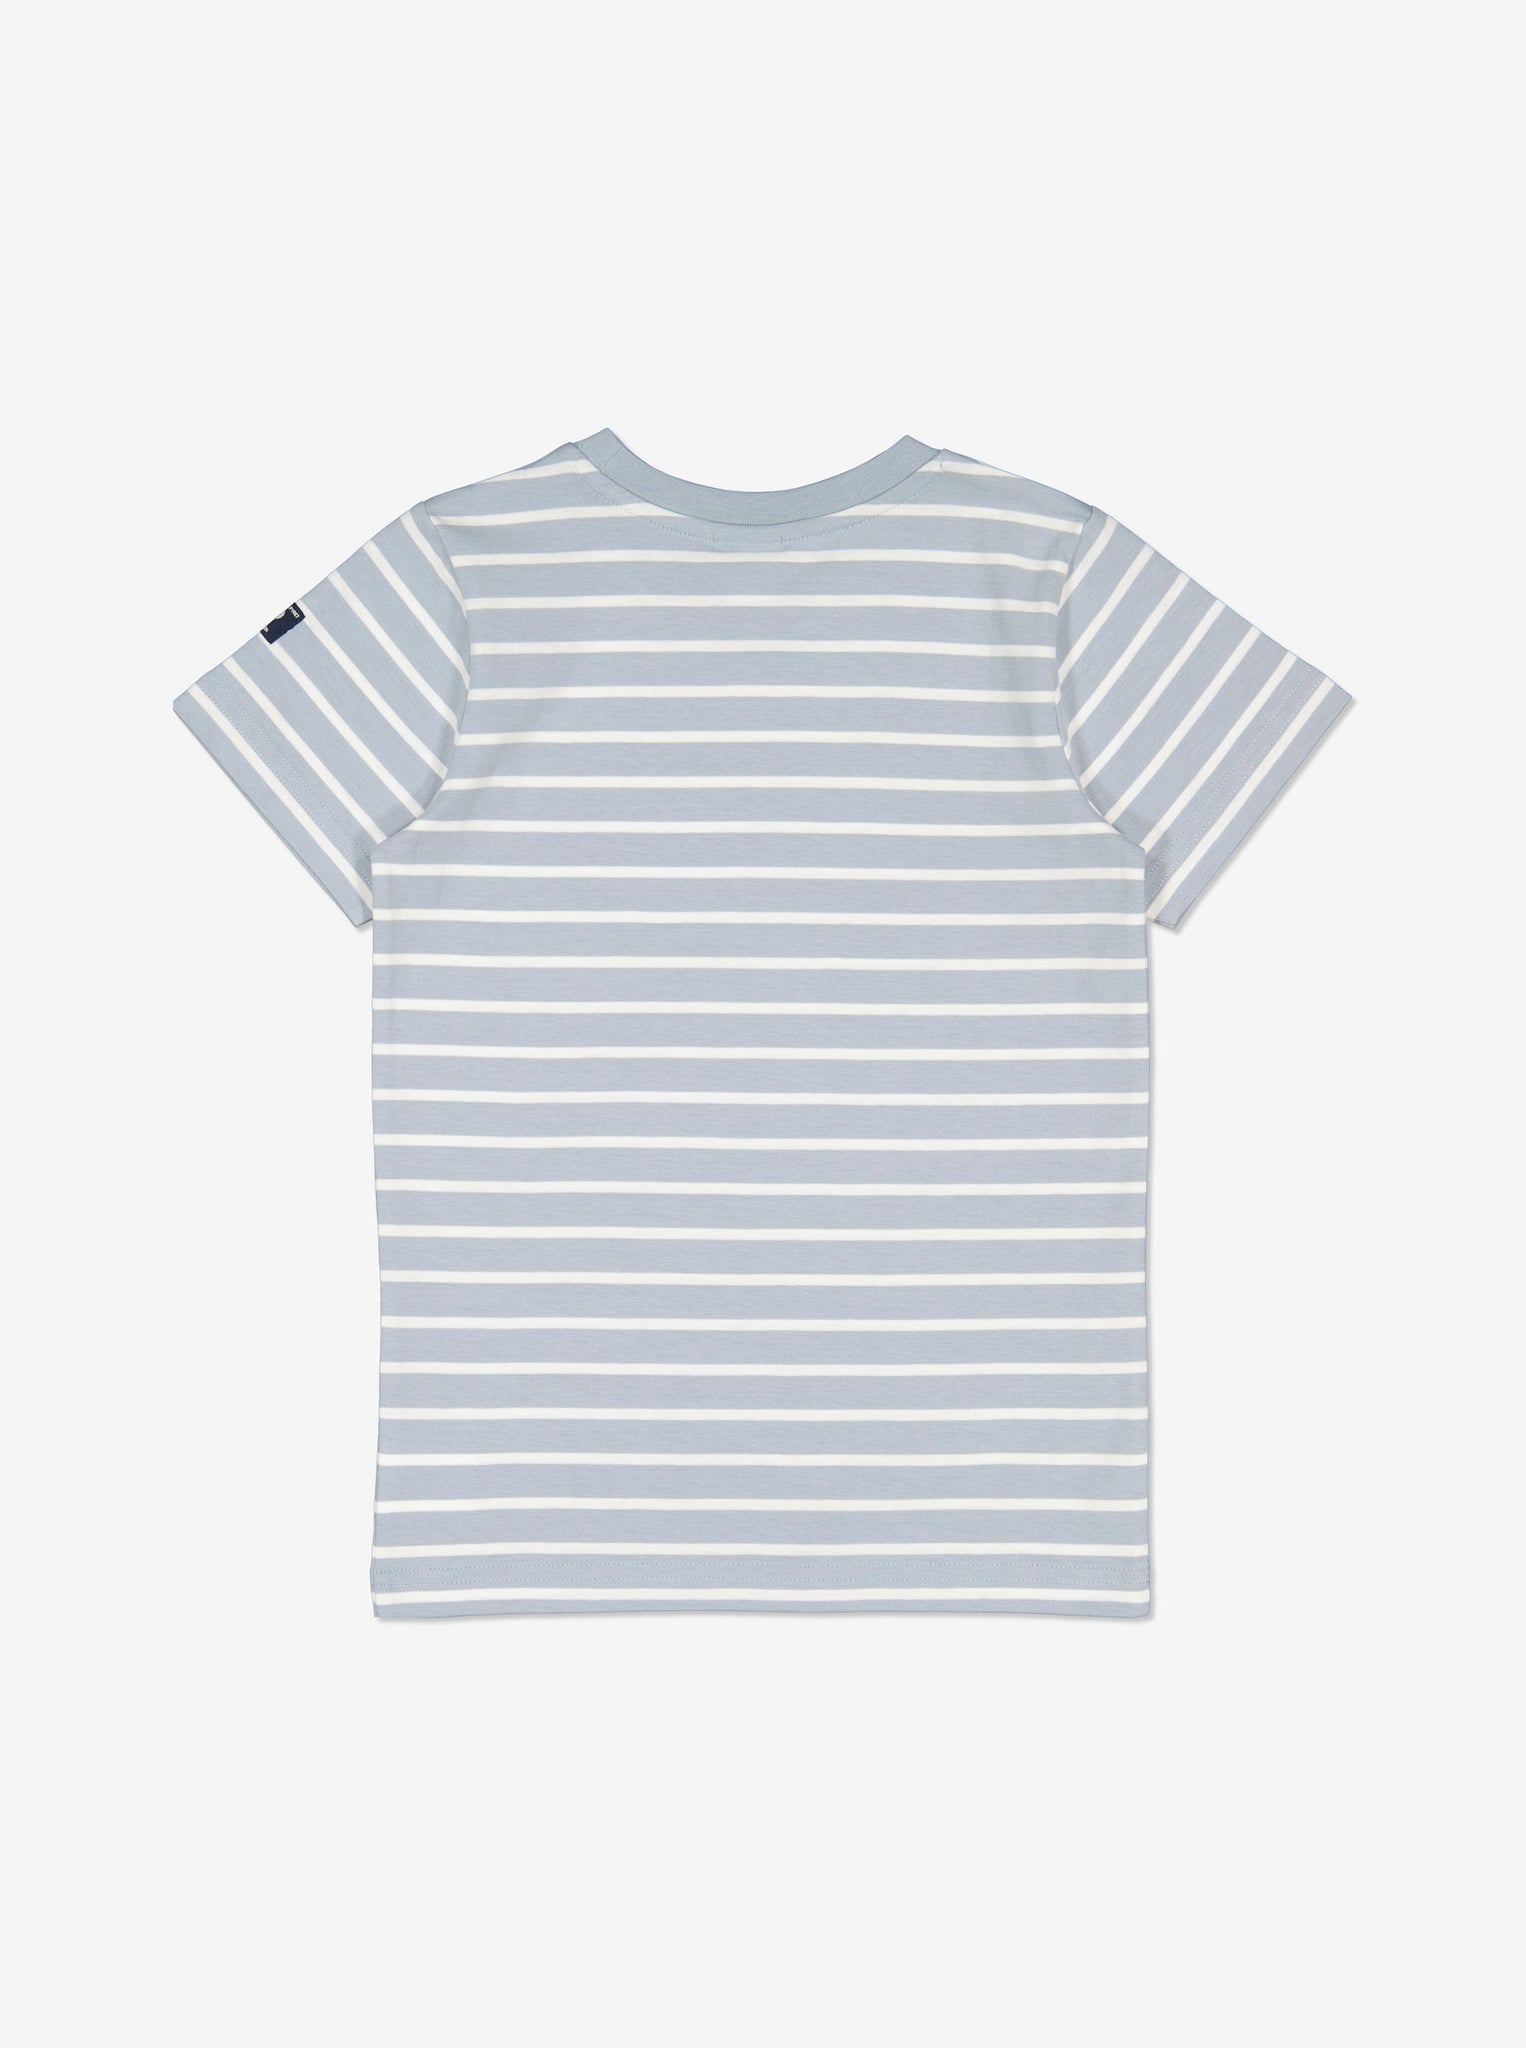  Cotton Striped Blue Kids T-Shirt from Polarn O. Pyret Kidswear. Made using ethically sourced materials.